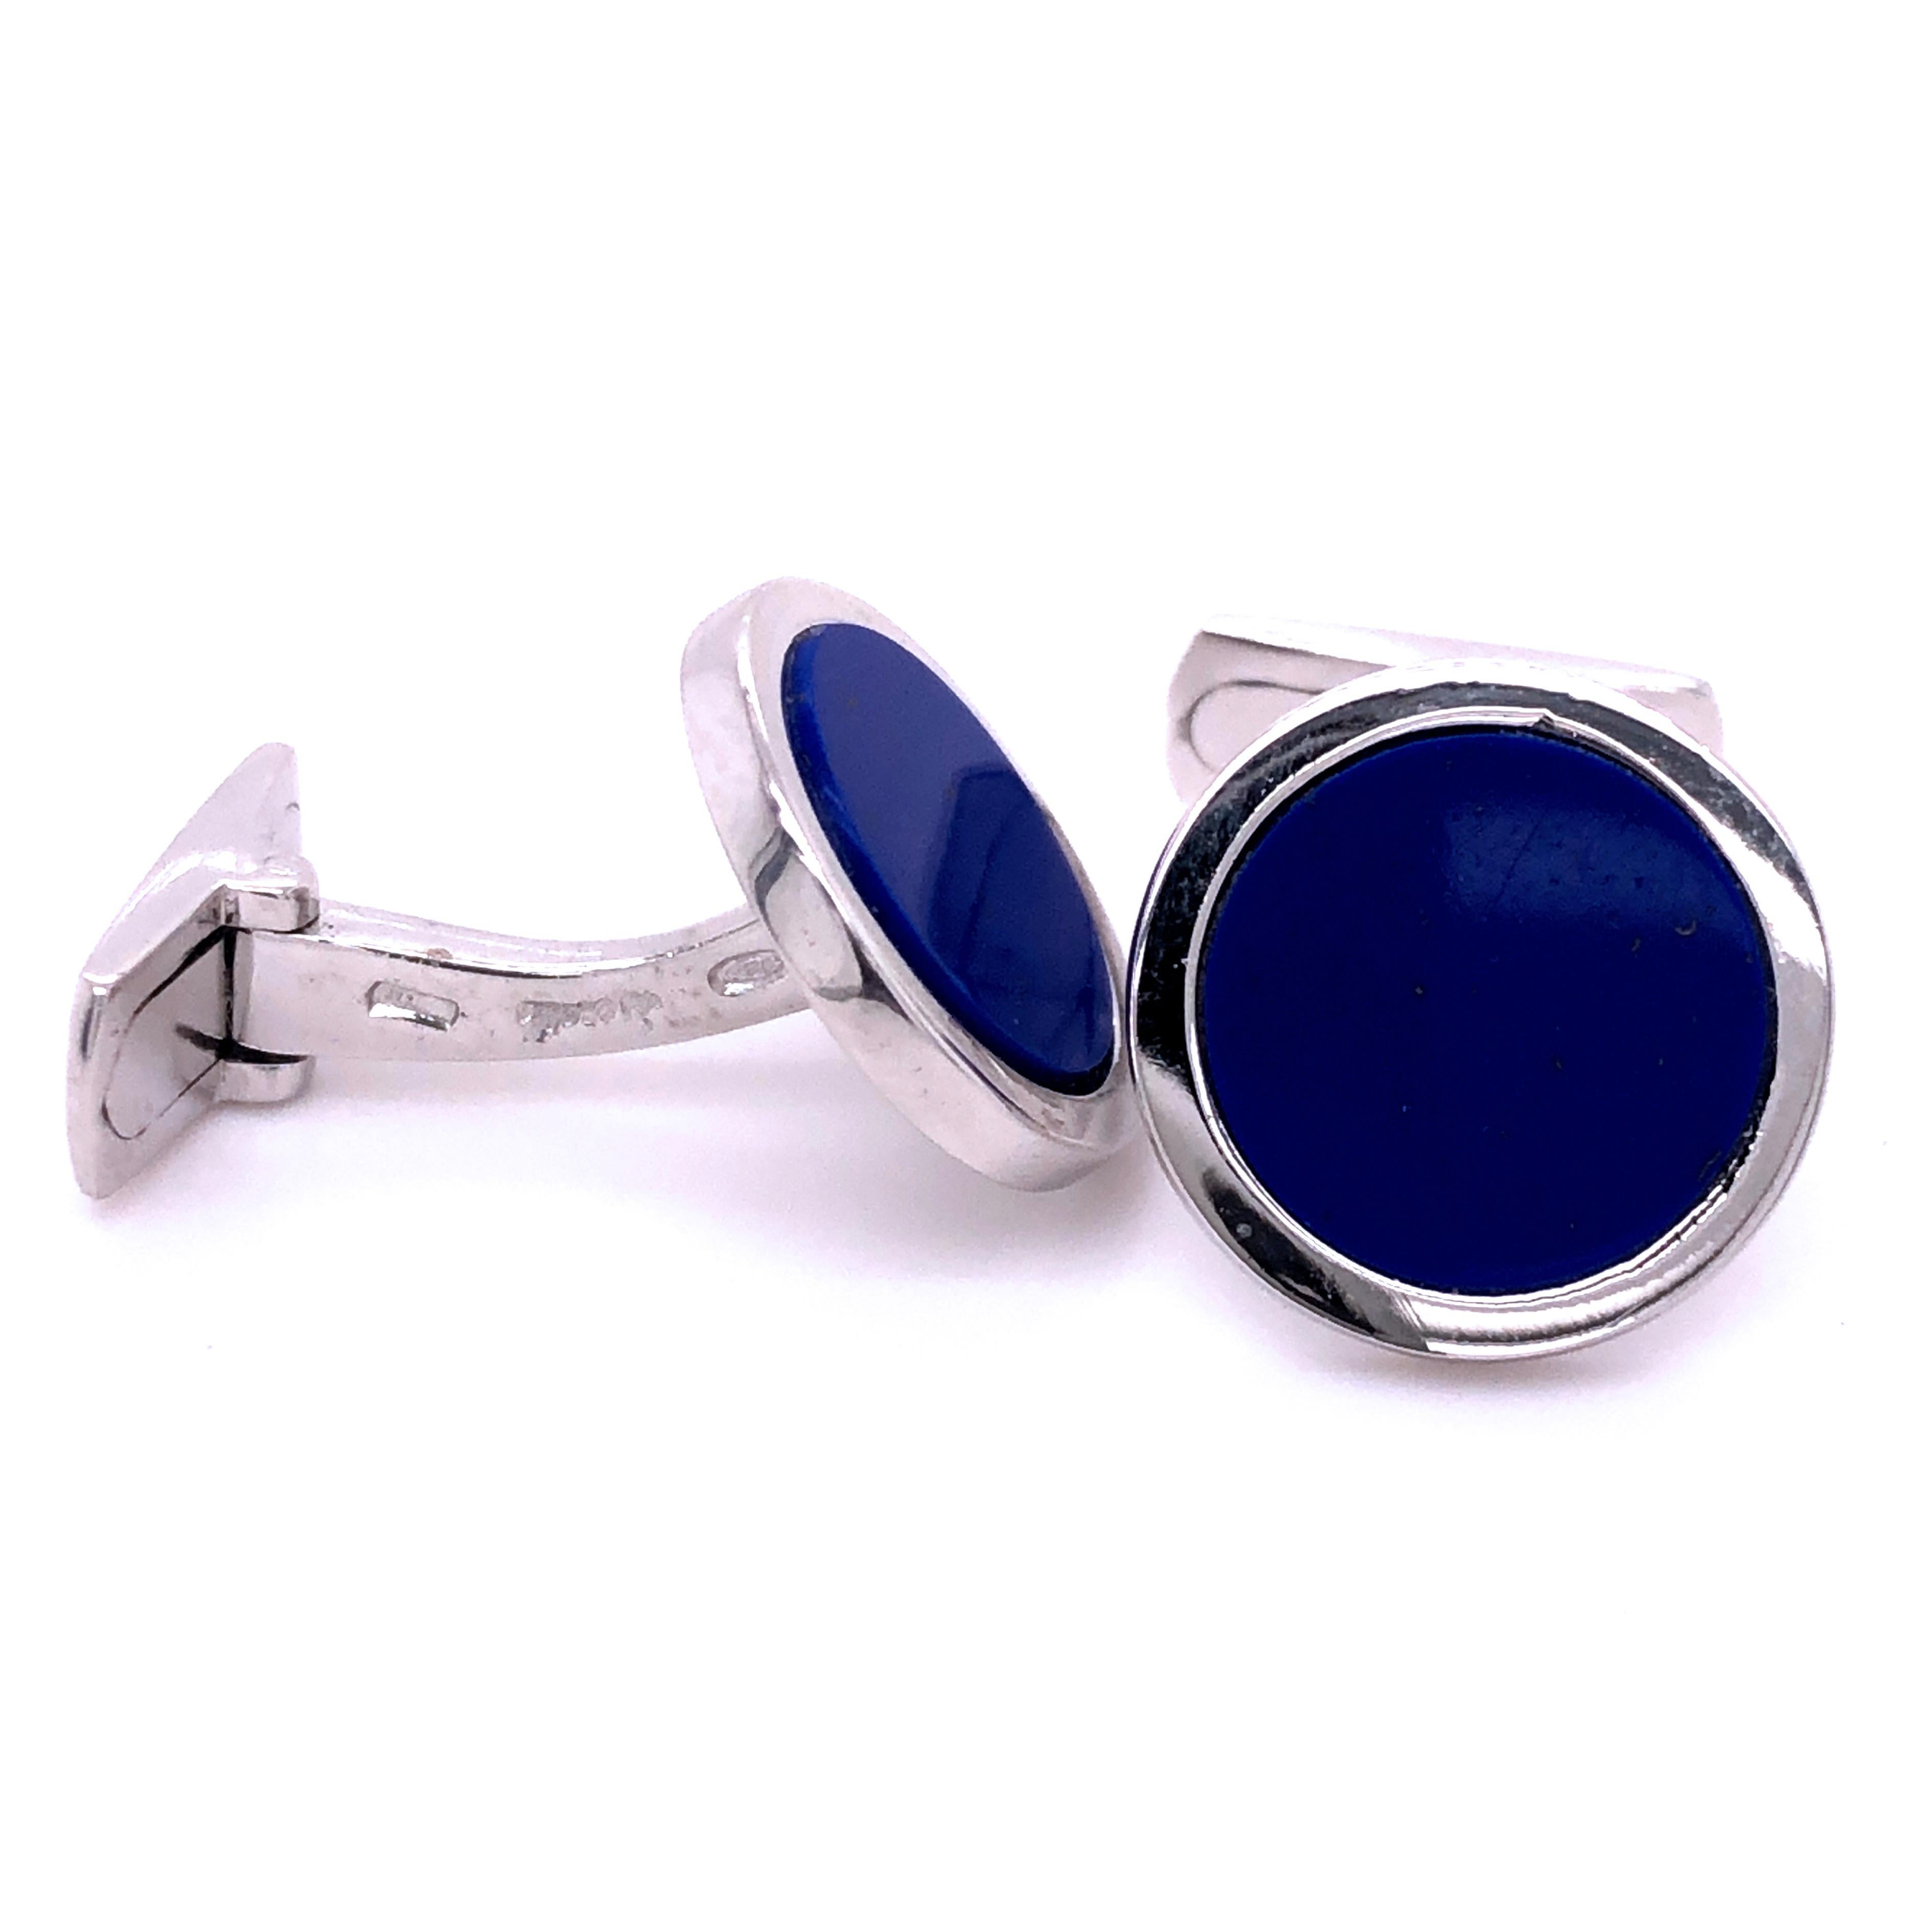 Chic and Timeless, Natural Hand Inlaid Lapis Lazuli Disk Round Shaped Sterling Silver Cufflinks, T-bar back.
In our smart fitted Black Box and Pouch.

